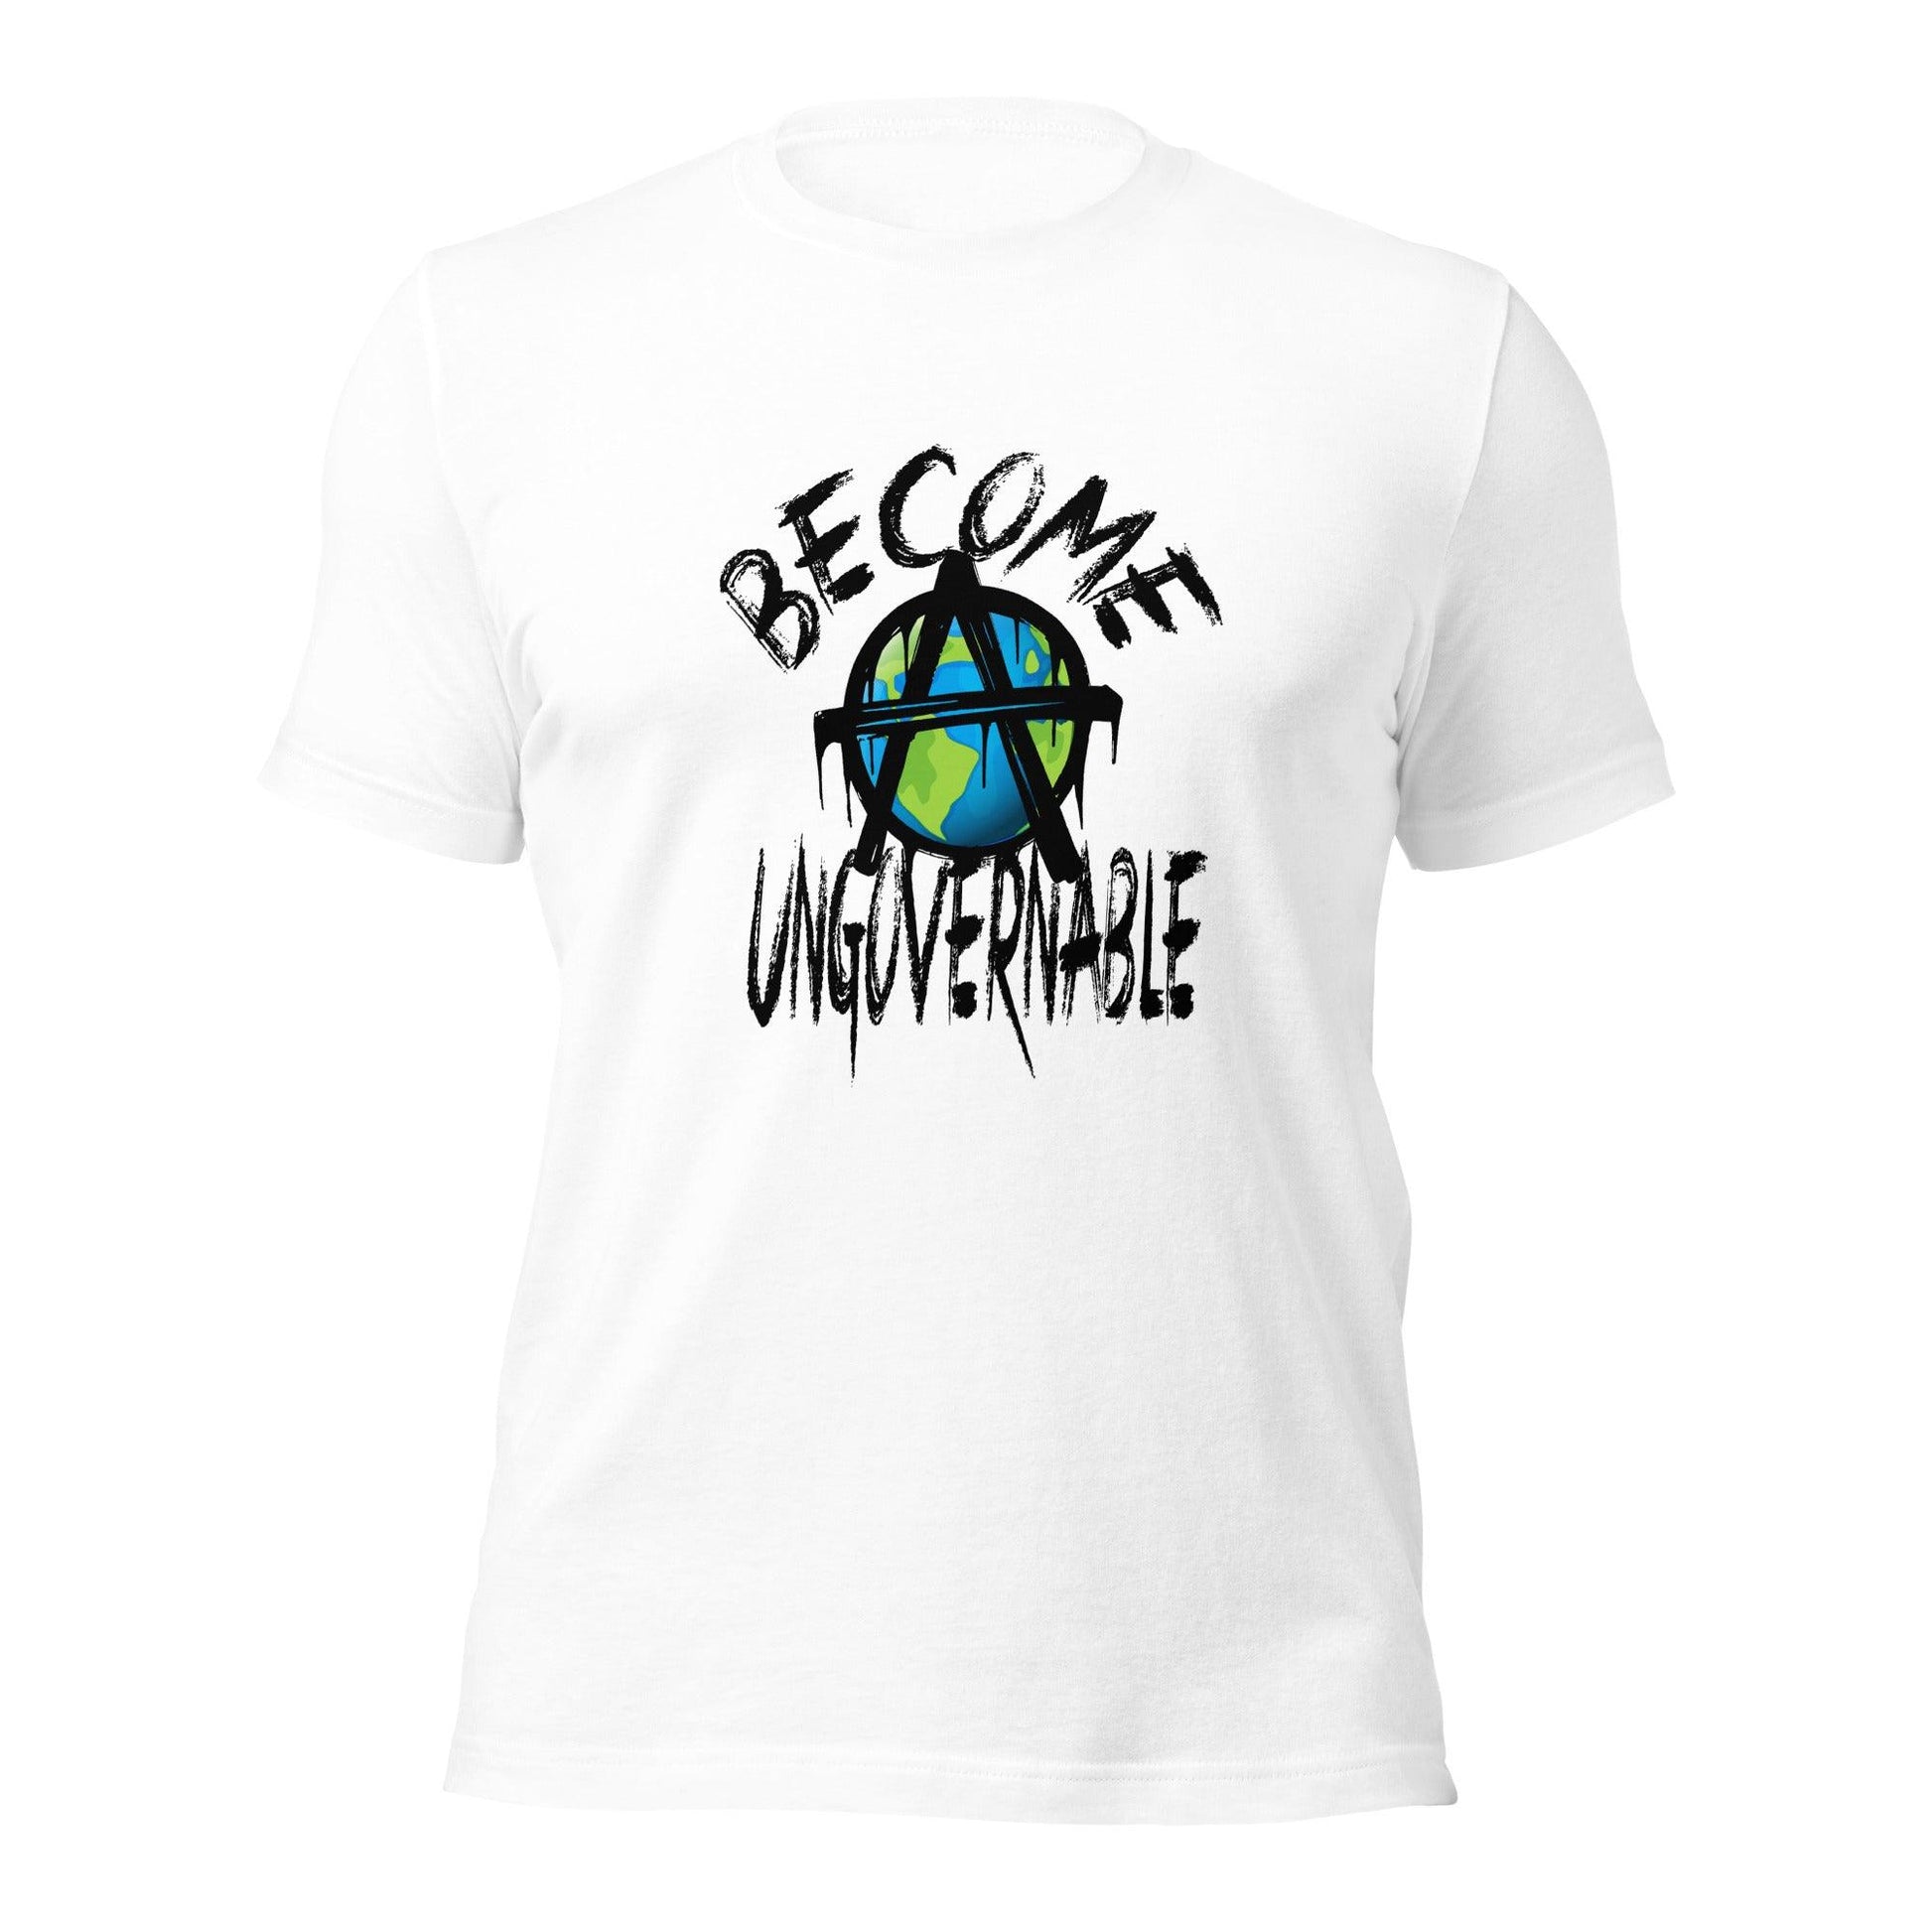 "Become Ungovernable" By @DigitalDuelist Unisex t-shirt - AnarchyWear